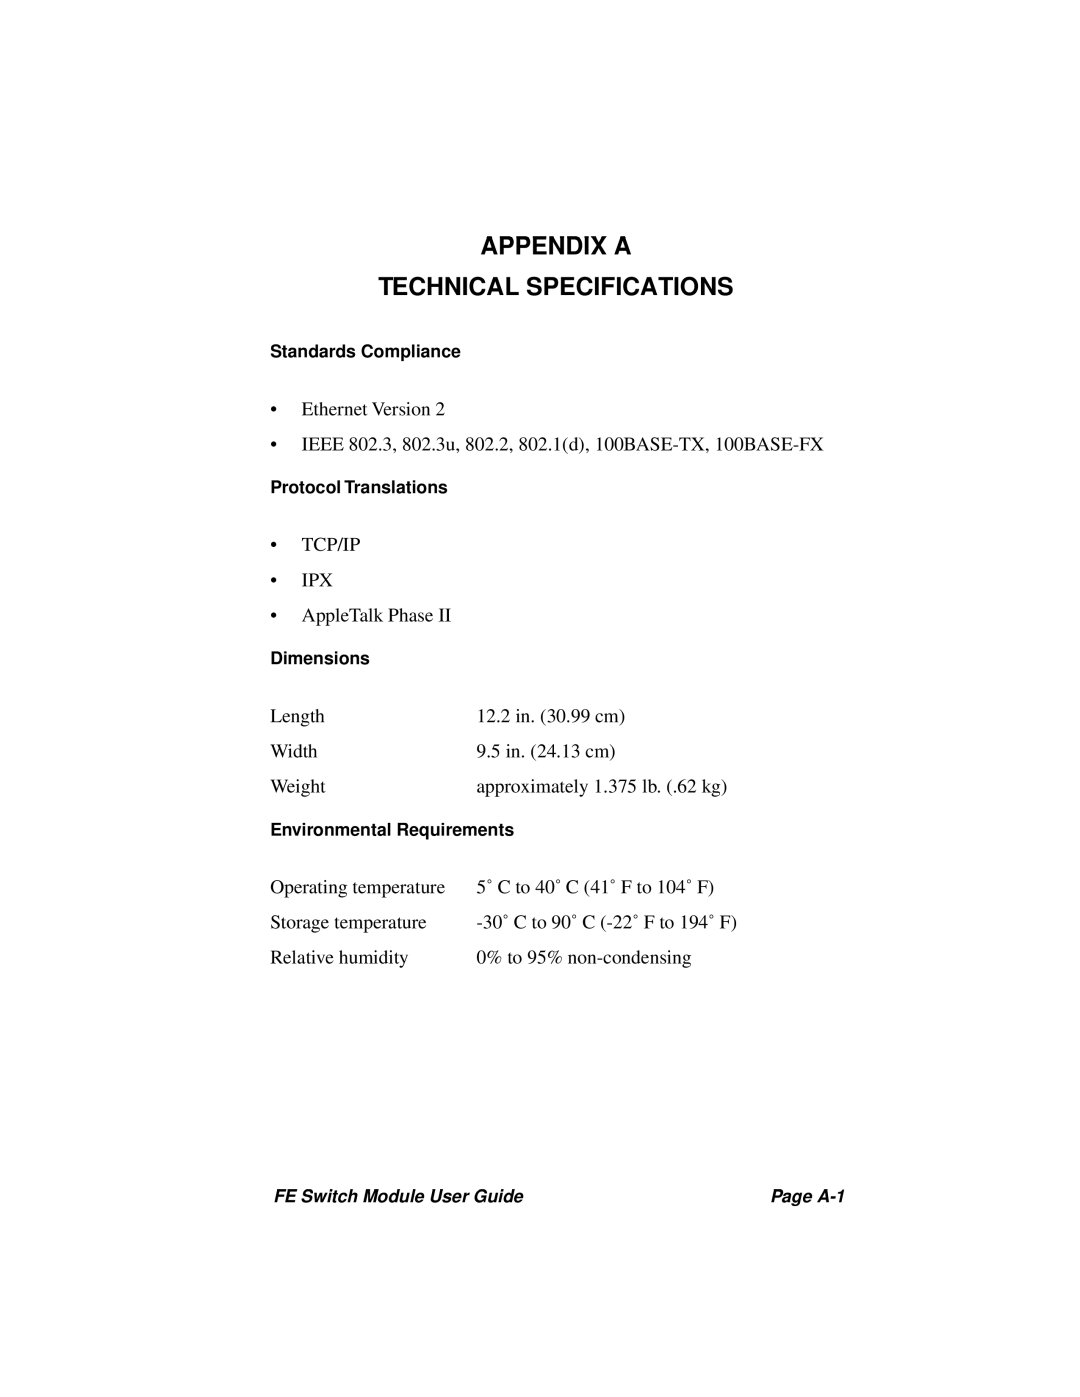 Cabletron Systems 3H08-04, 3H02-04 manual Appendix A Technical Specifications 